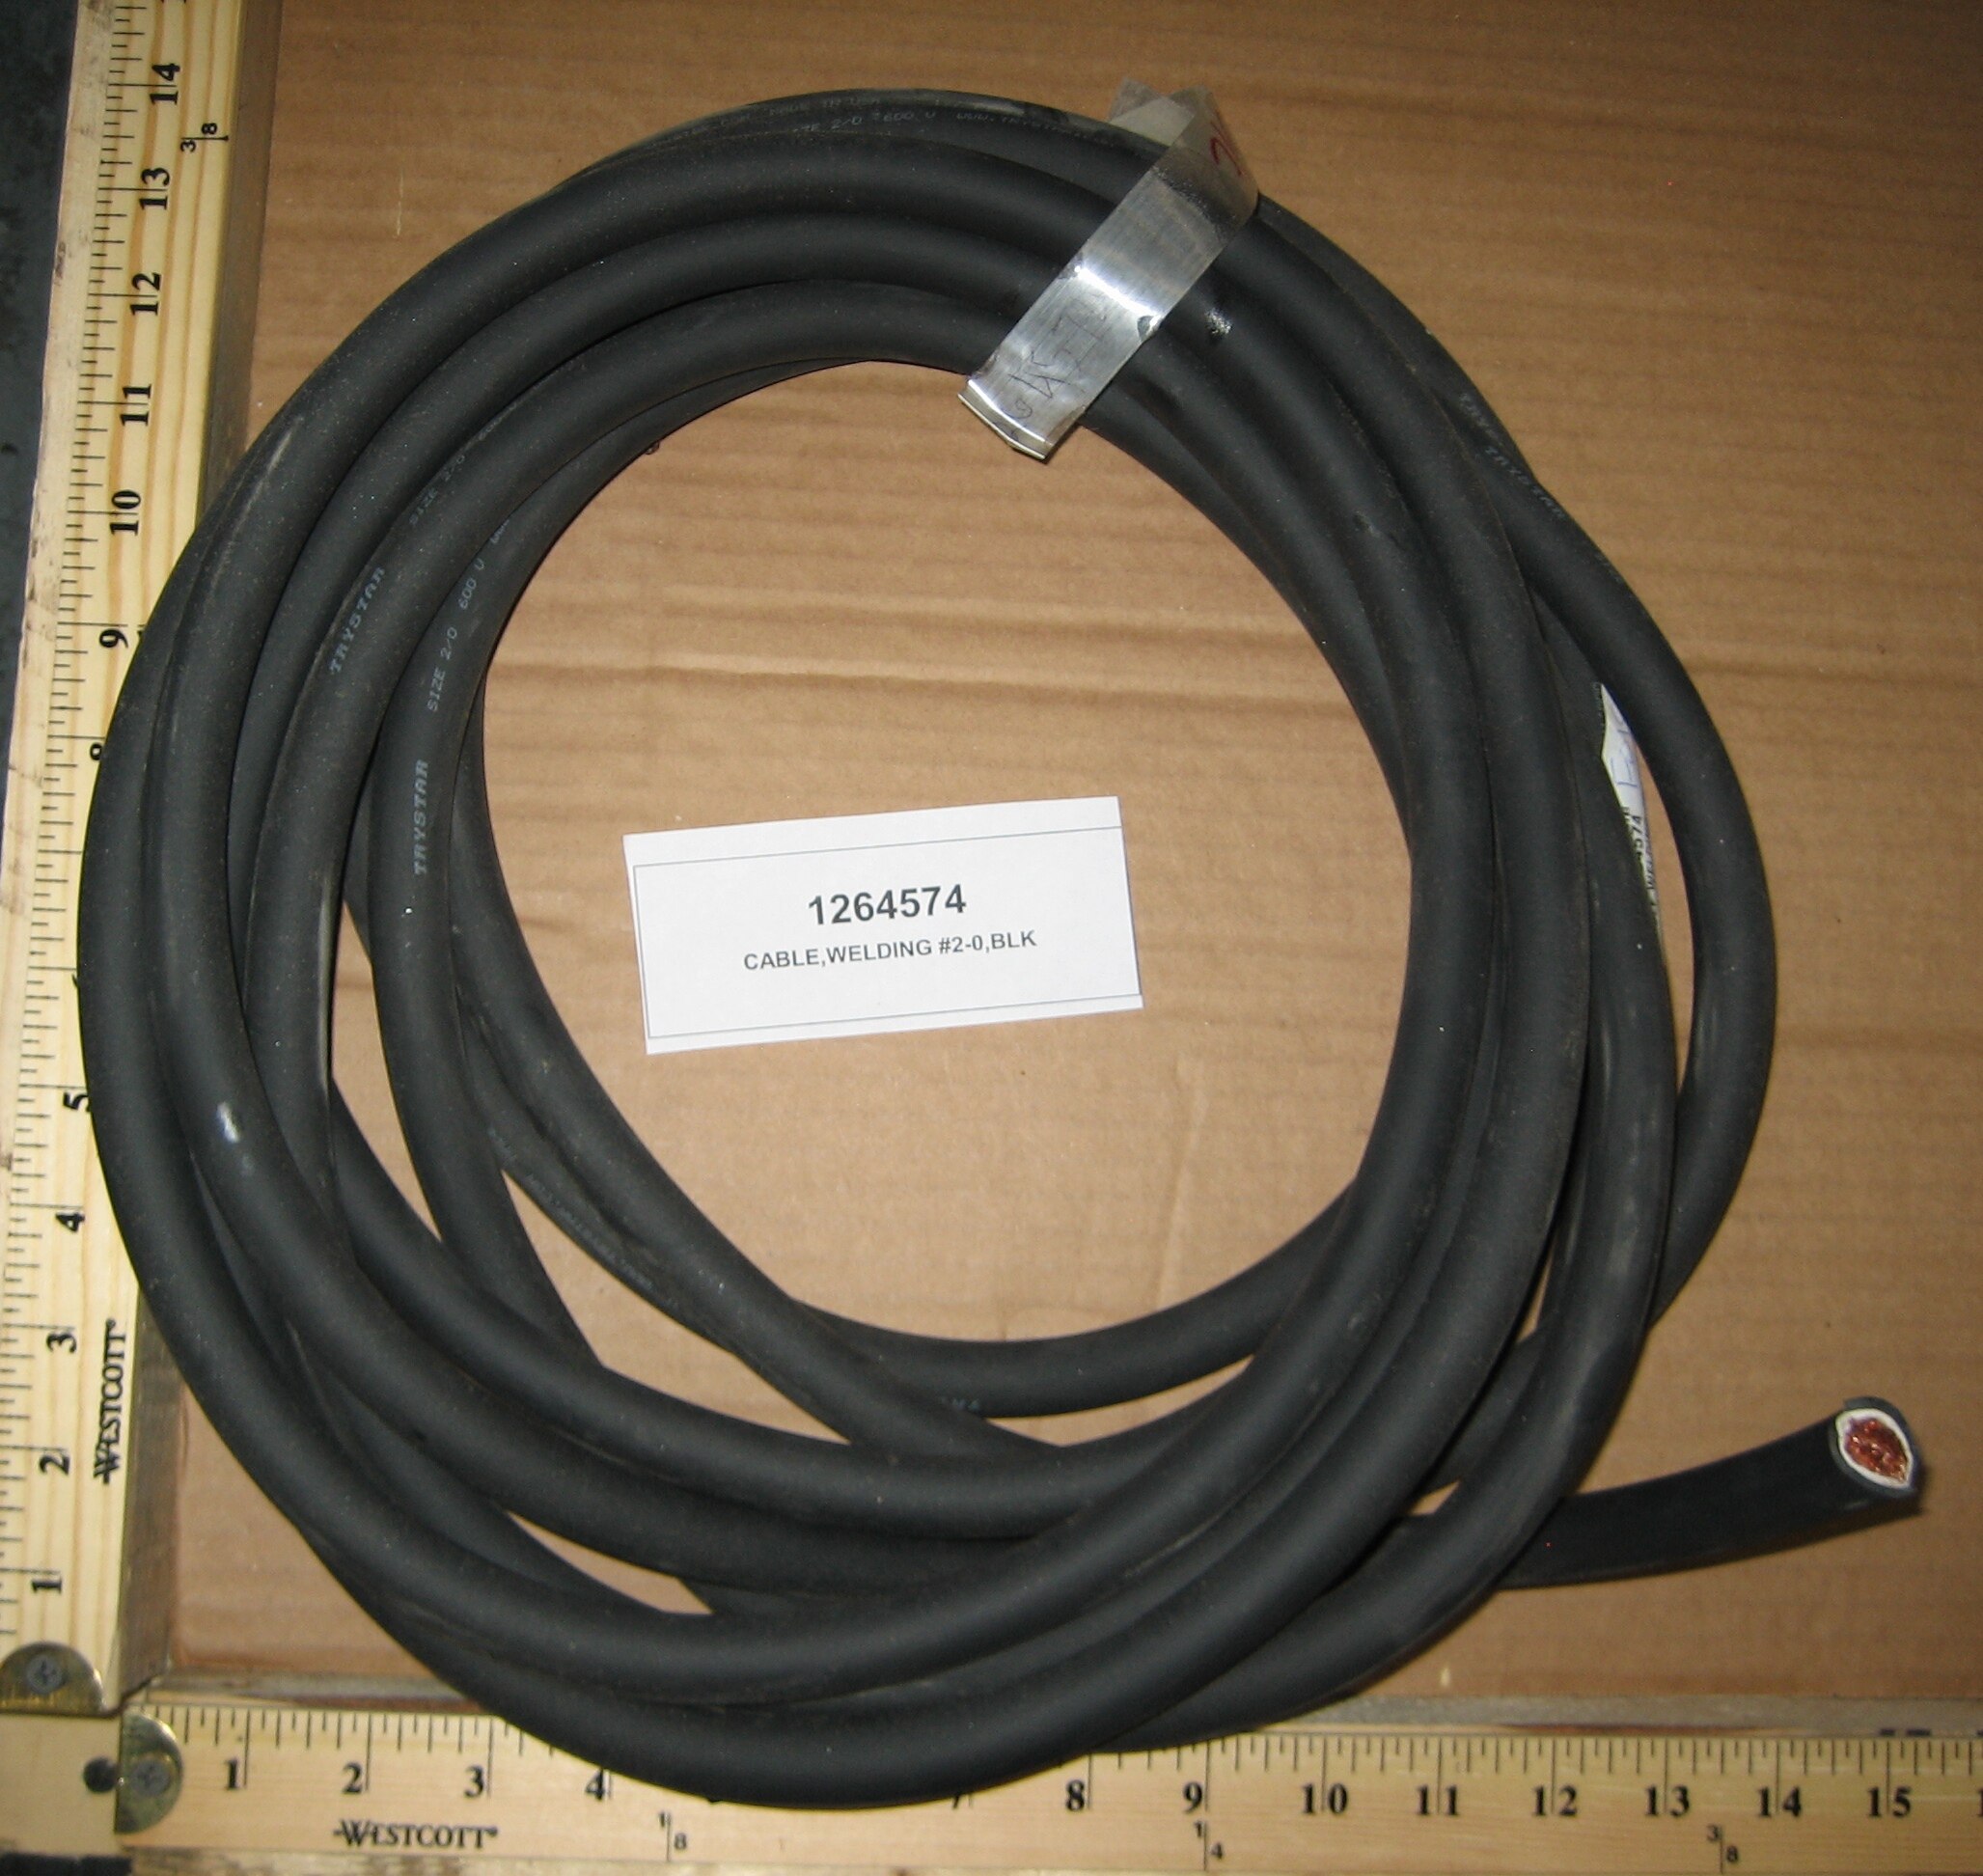 CABLE,WELDING #2-0,BLK